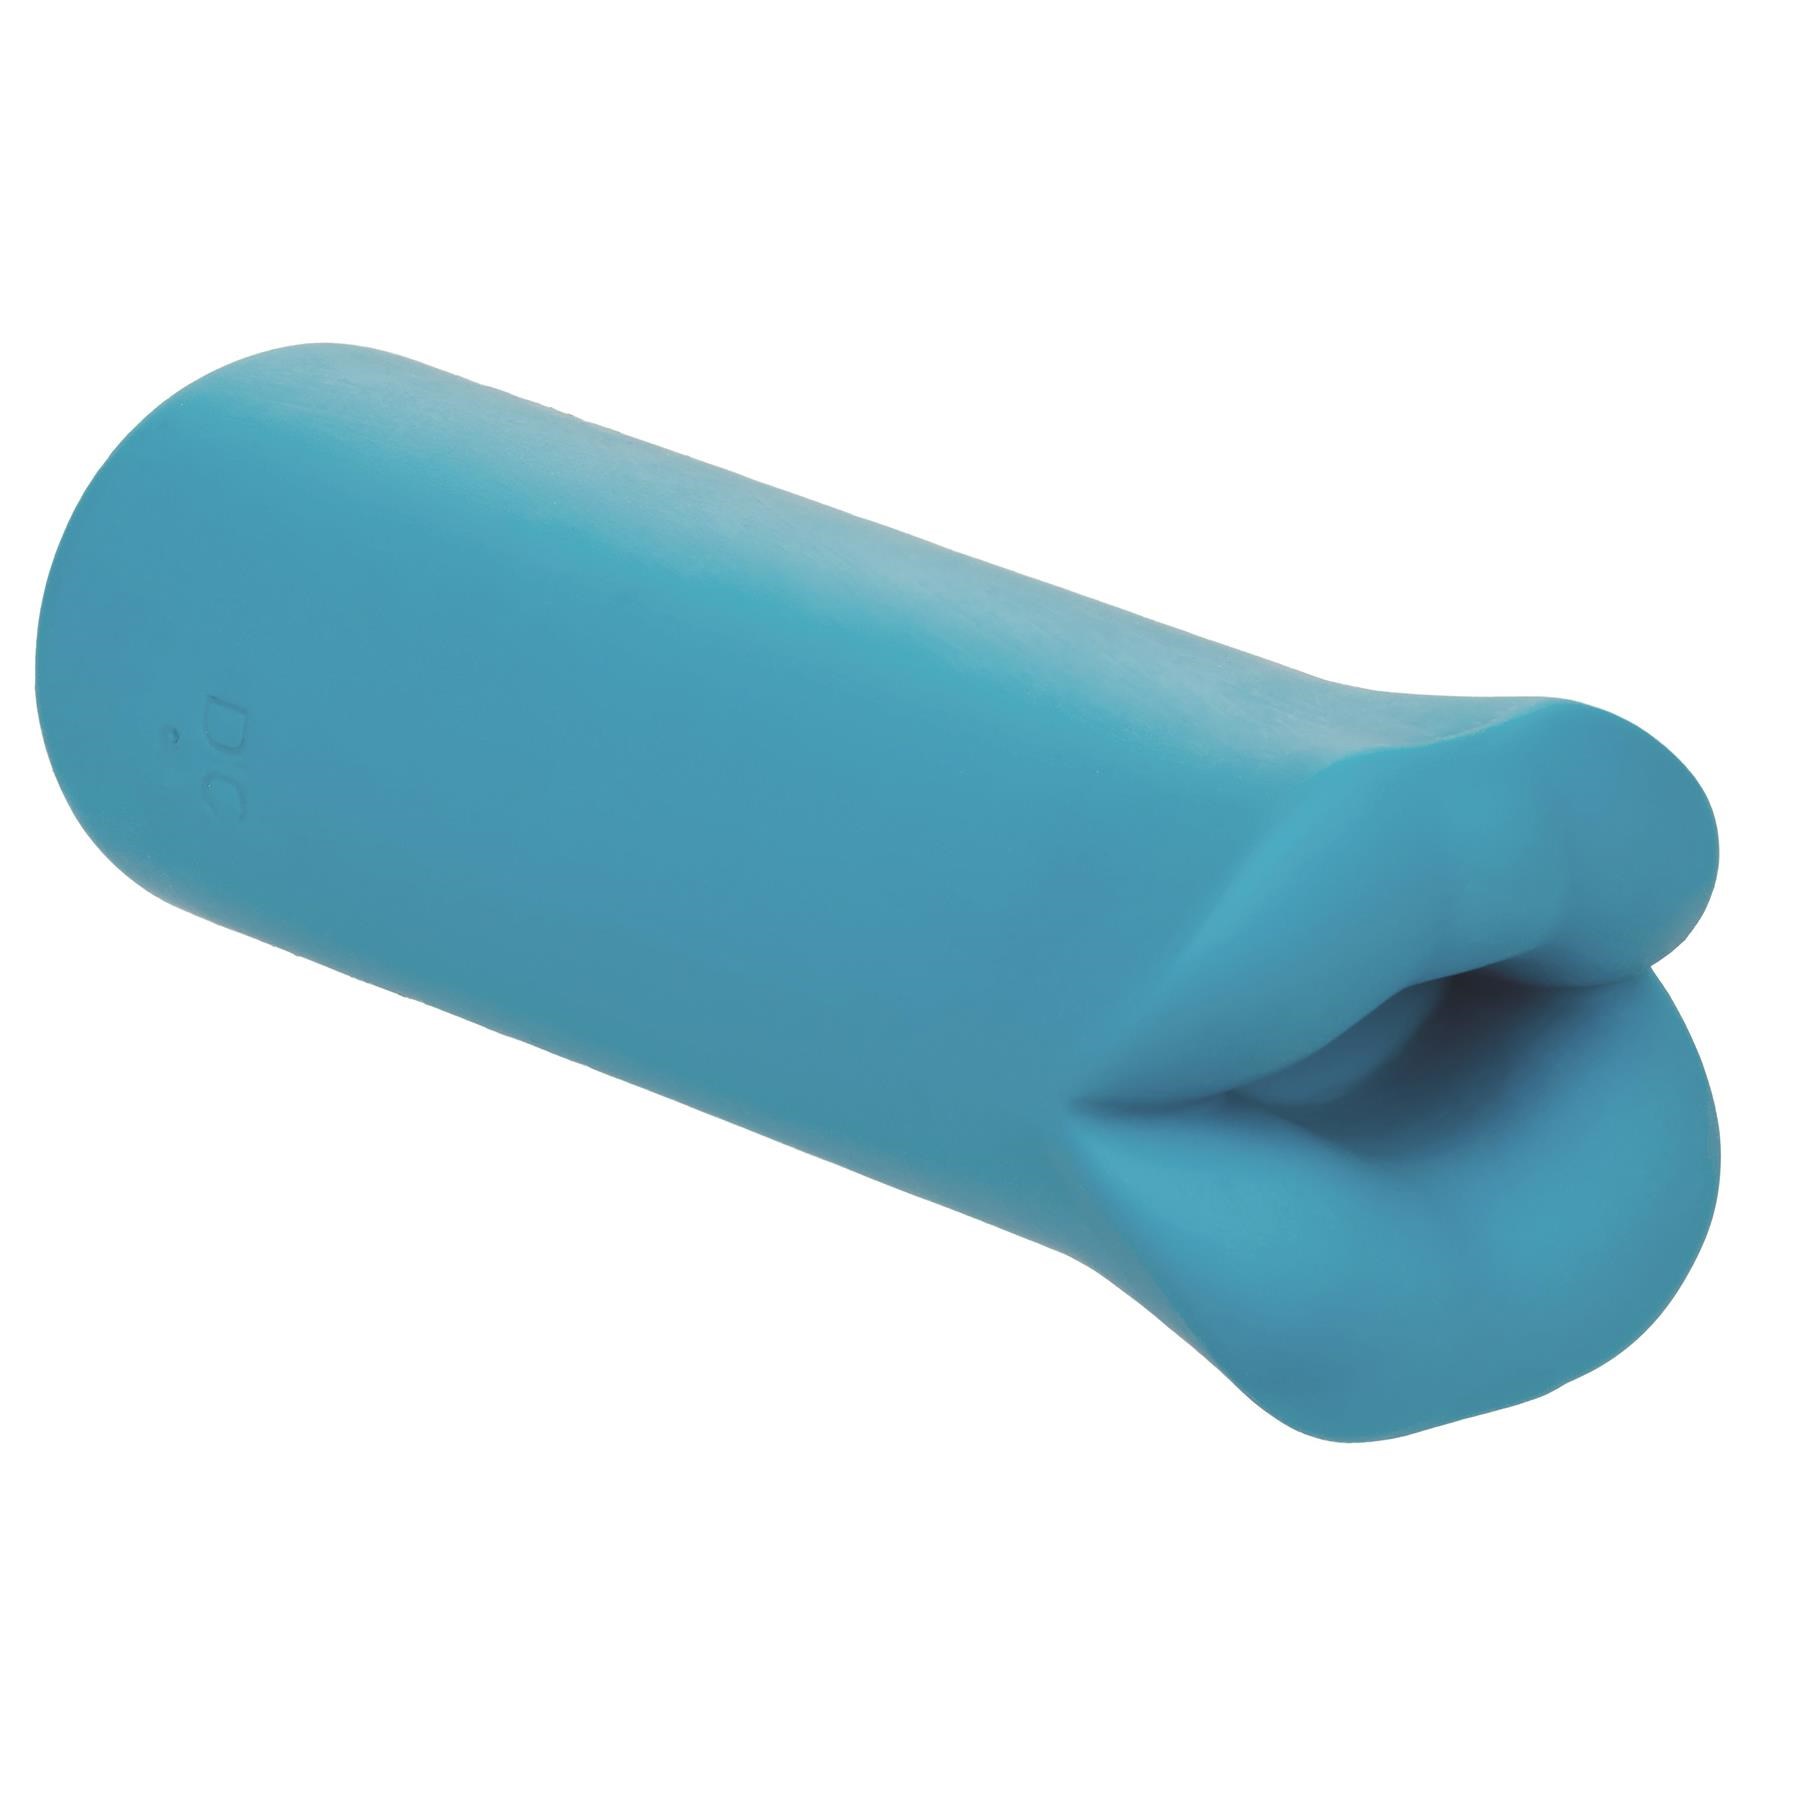 Kyst Lips Clitoral Massager - Product Shot #1